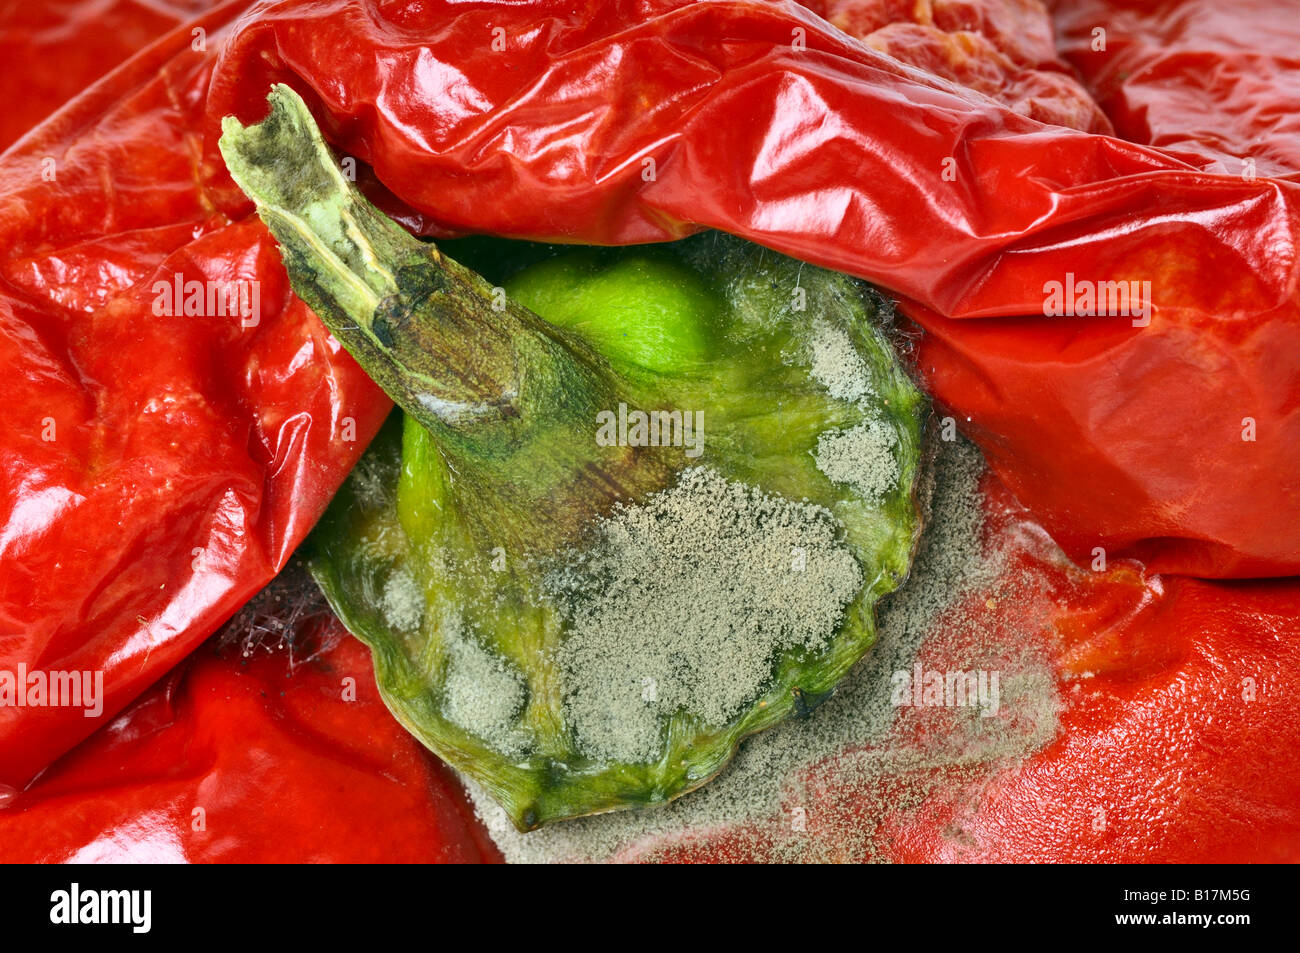 Old and moldy red bell pepper Stock Photo